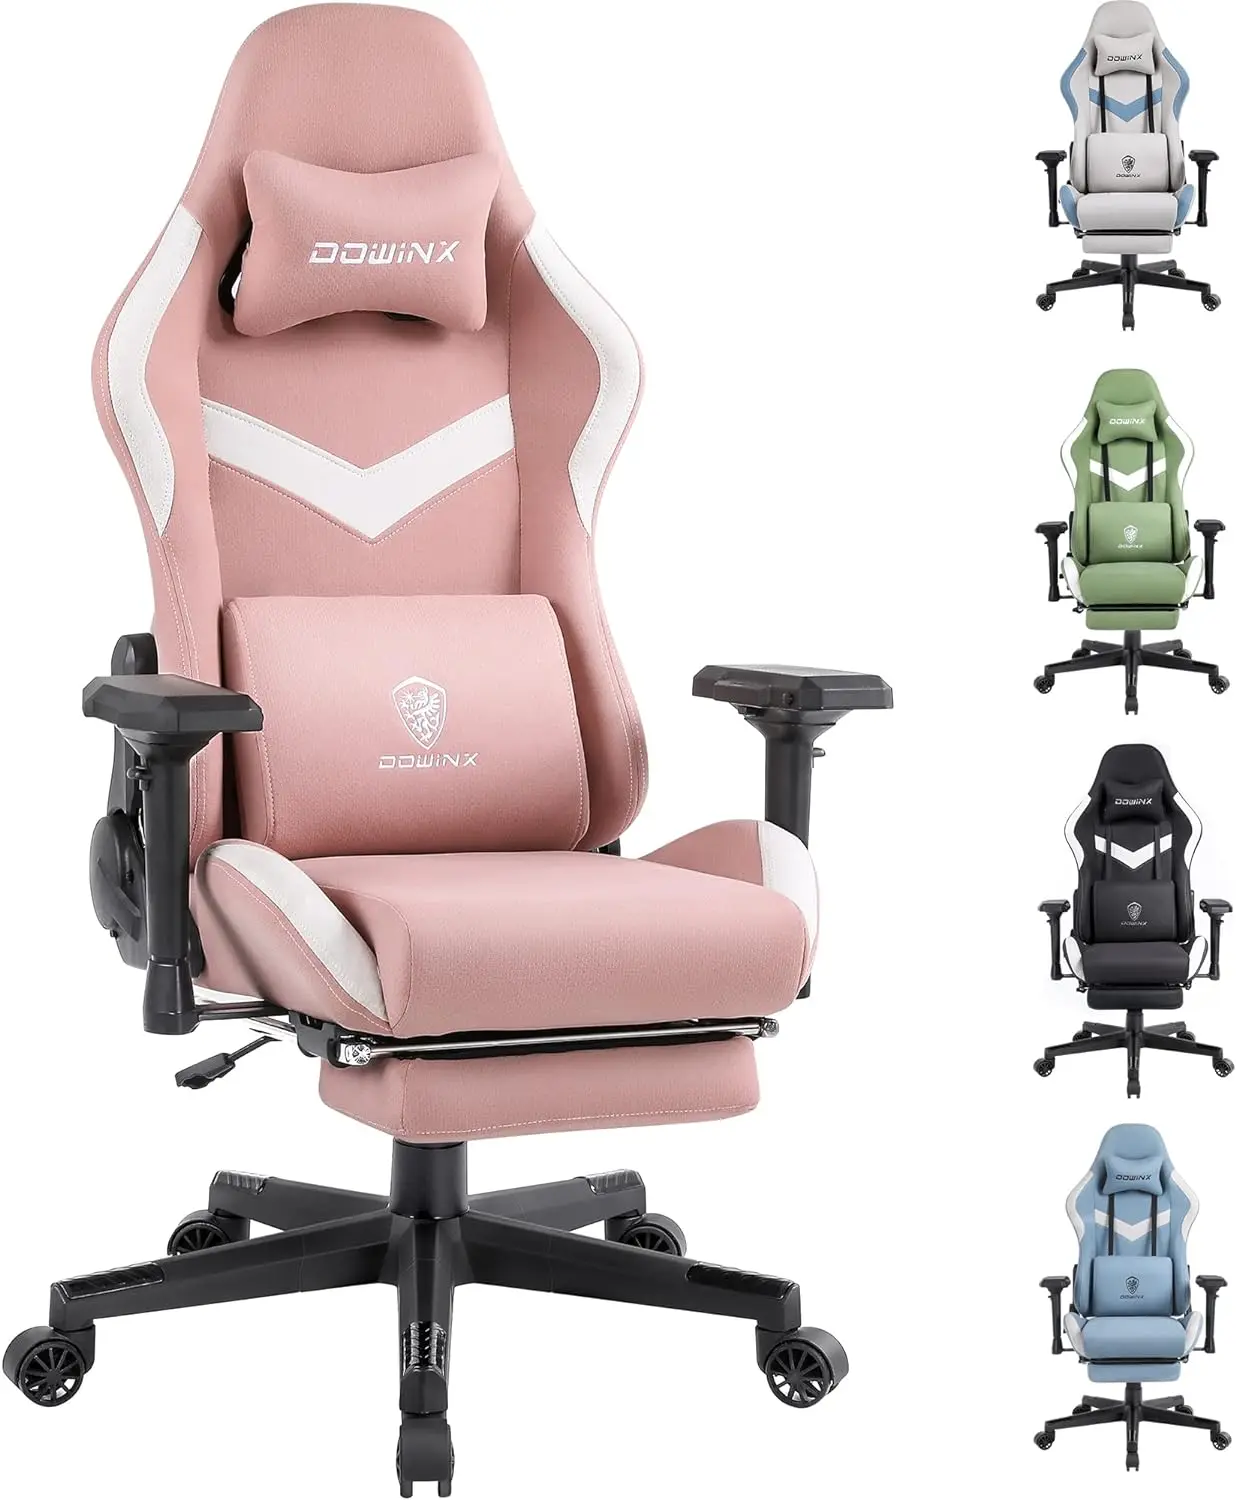 

Dowinx Gaming Chair Breathable Fabric Office Chair with Pocket Spring Cushion and 4D Armrest, High Back Ergonomic Computer Chair